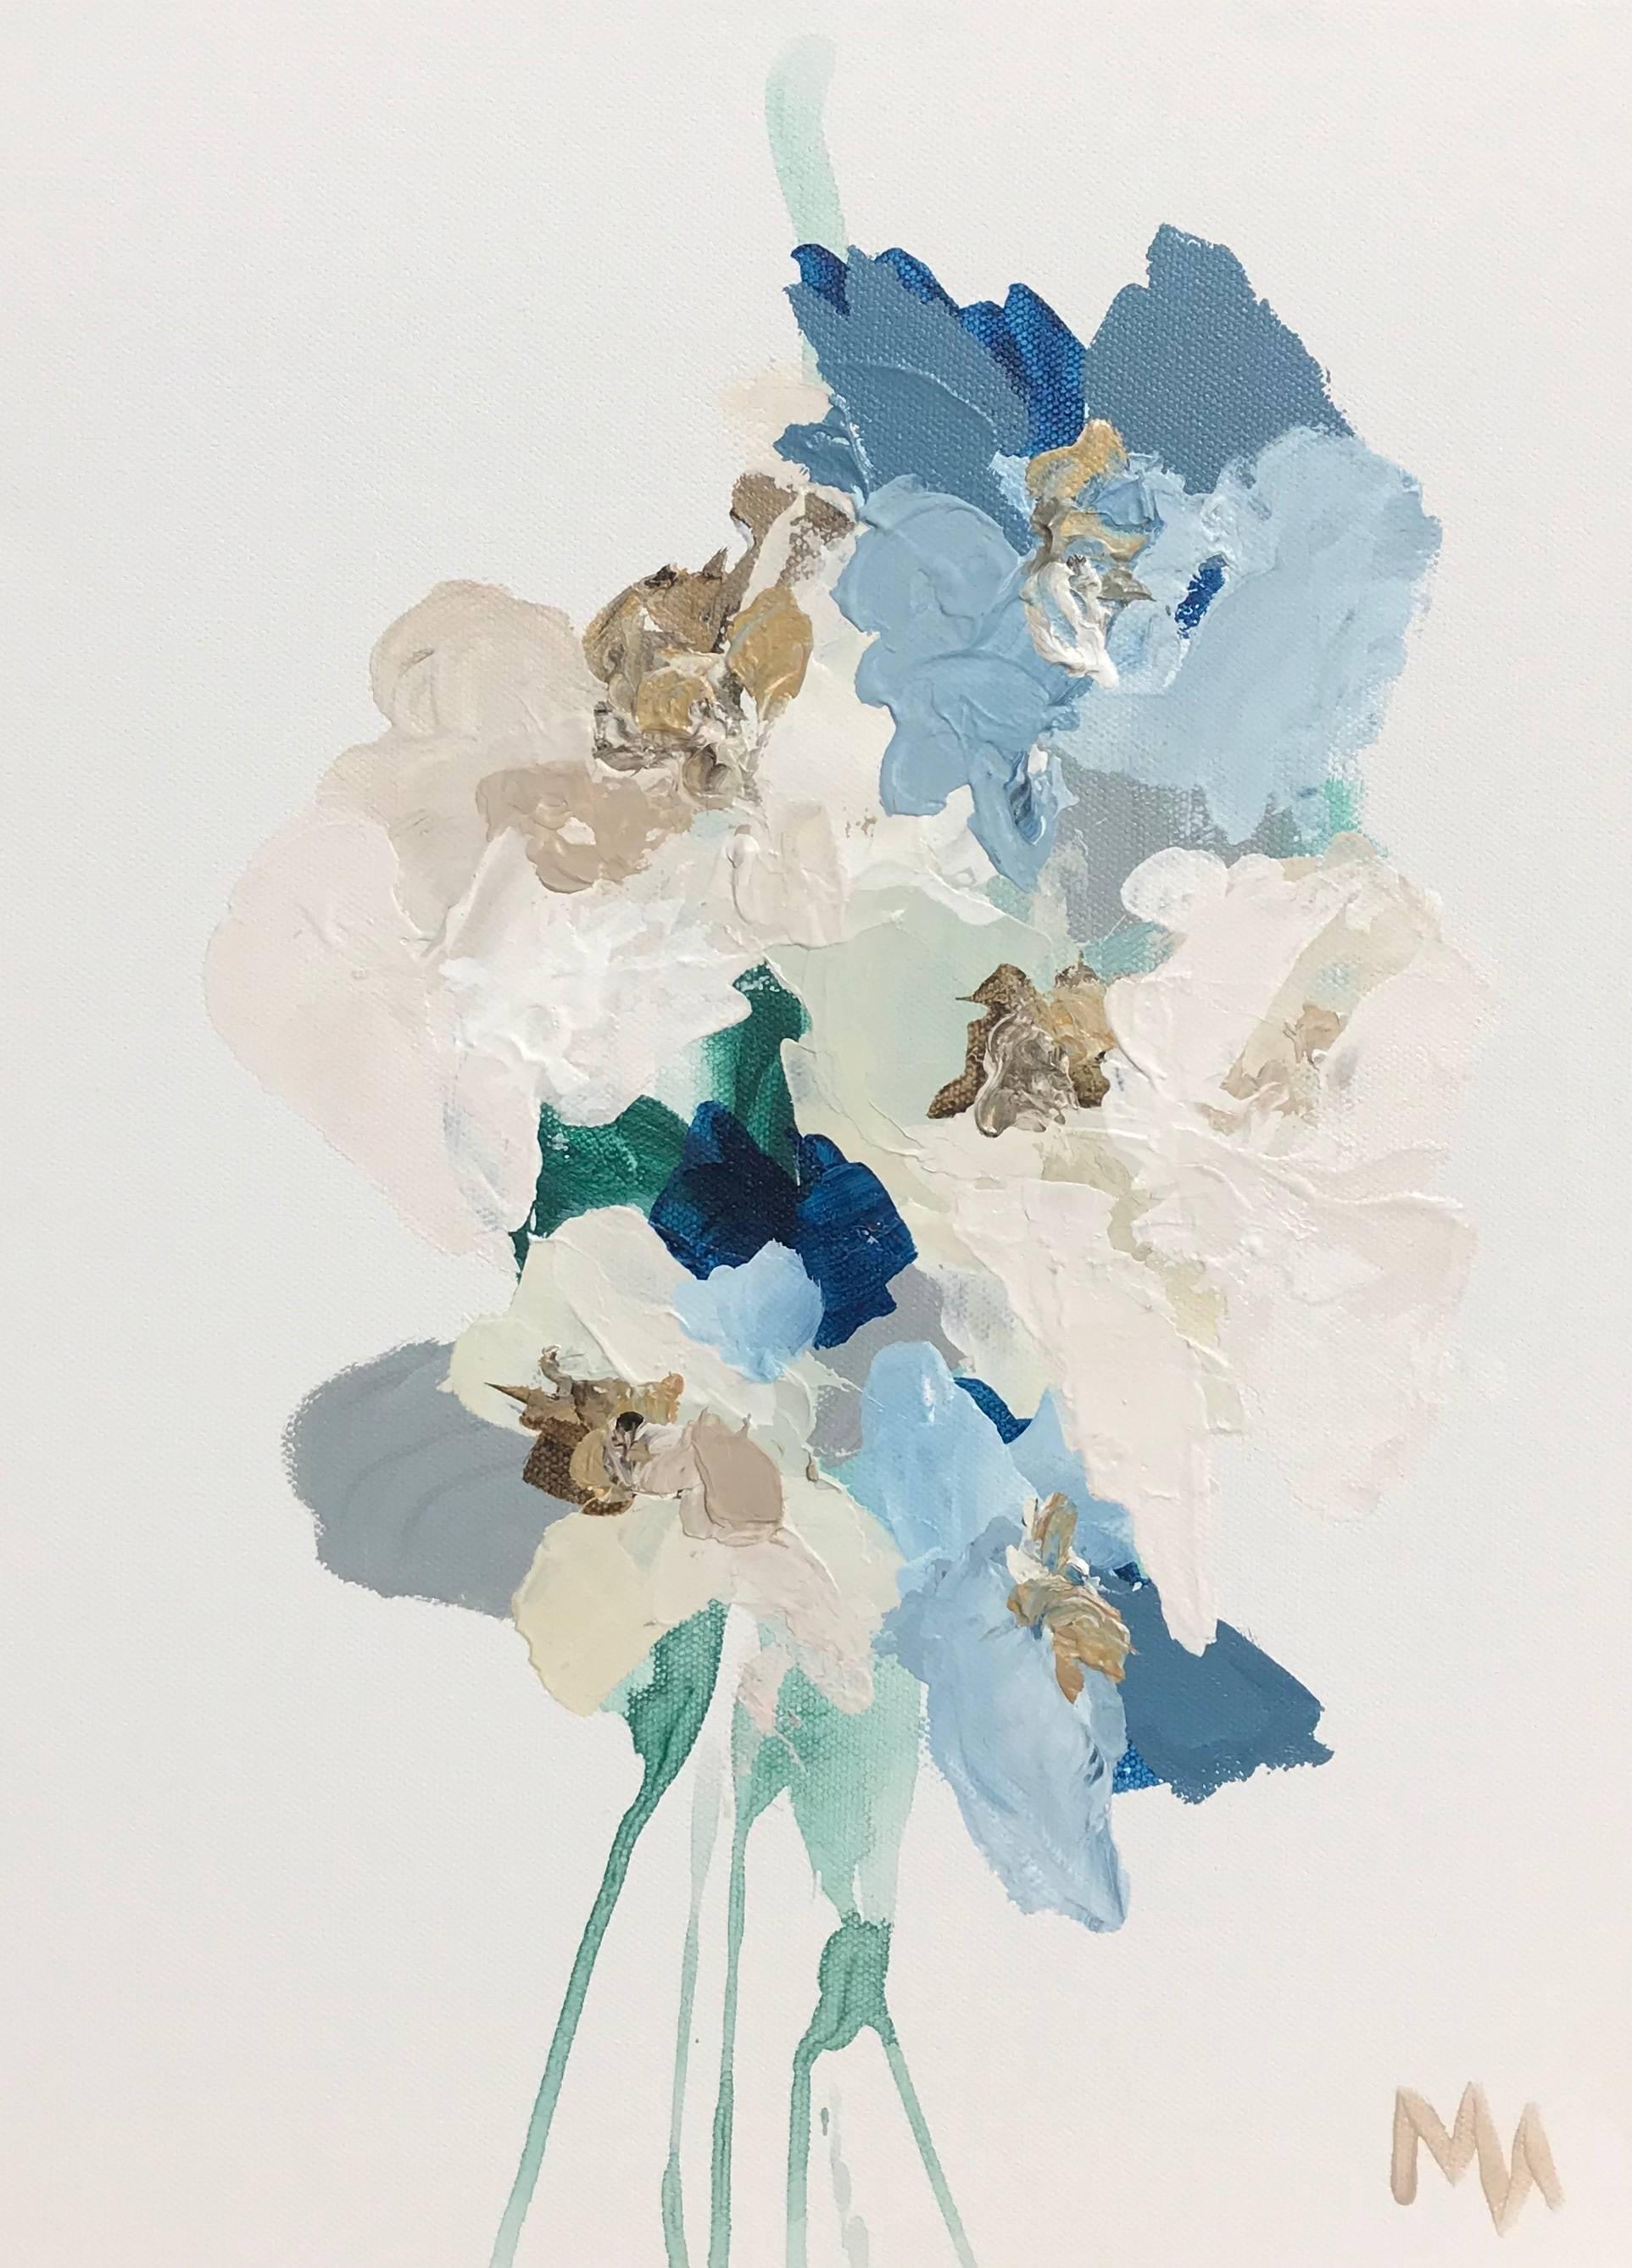 Mia Frandsen Still-Life Painting - A Bundle of Seedlings No. 7, Mixed Media on Canvas Contemporary Floral Painting